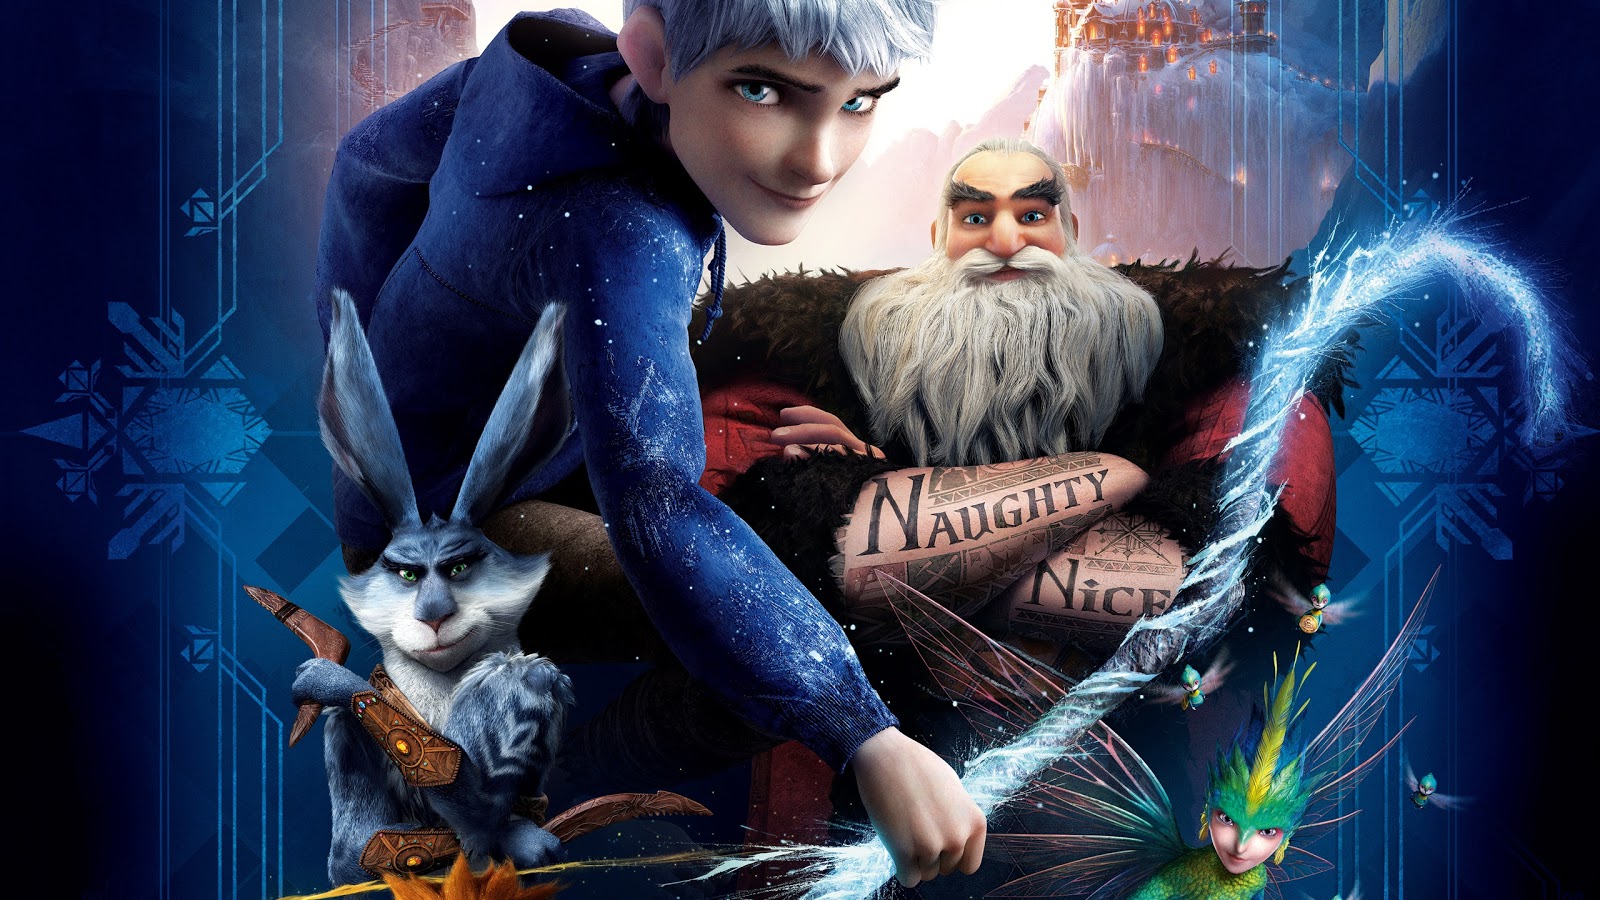 Rise Of The Guardians Wallpaper HD Image For Pc